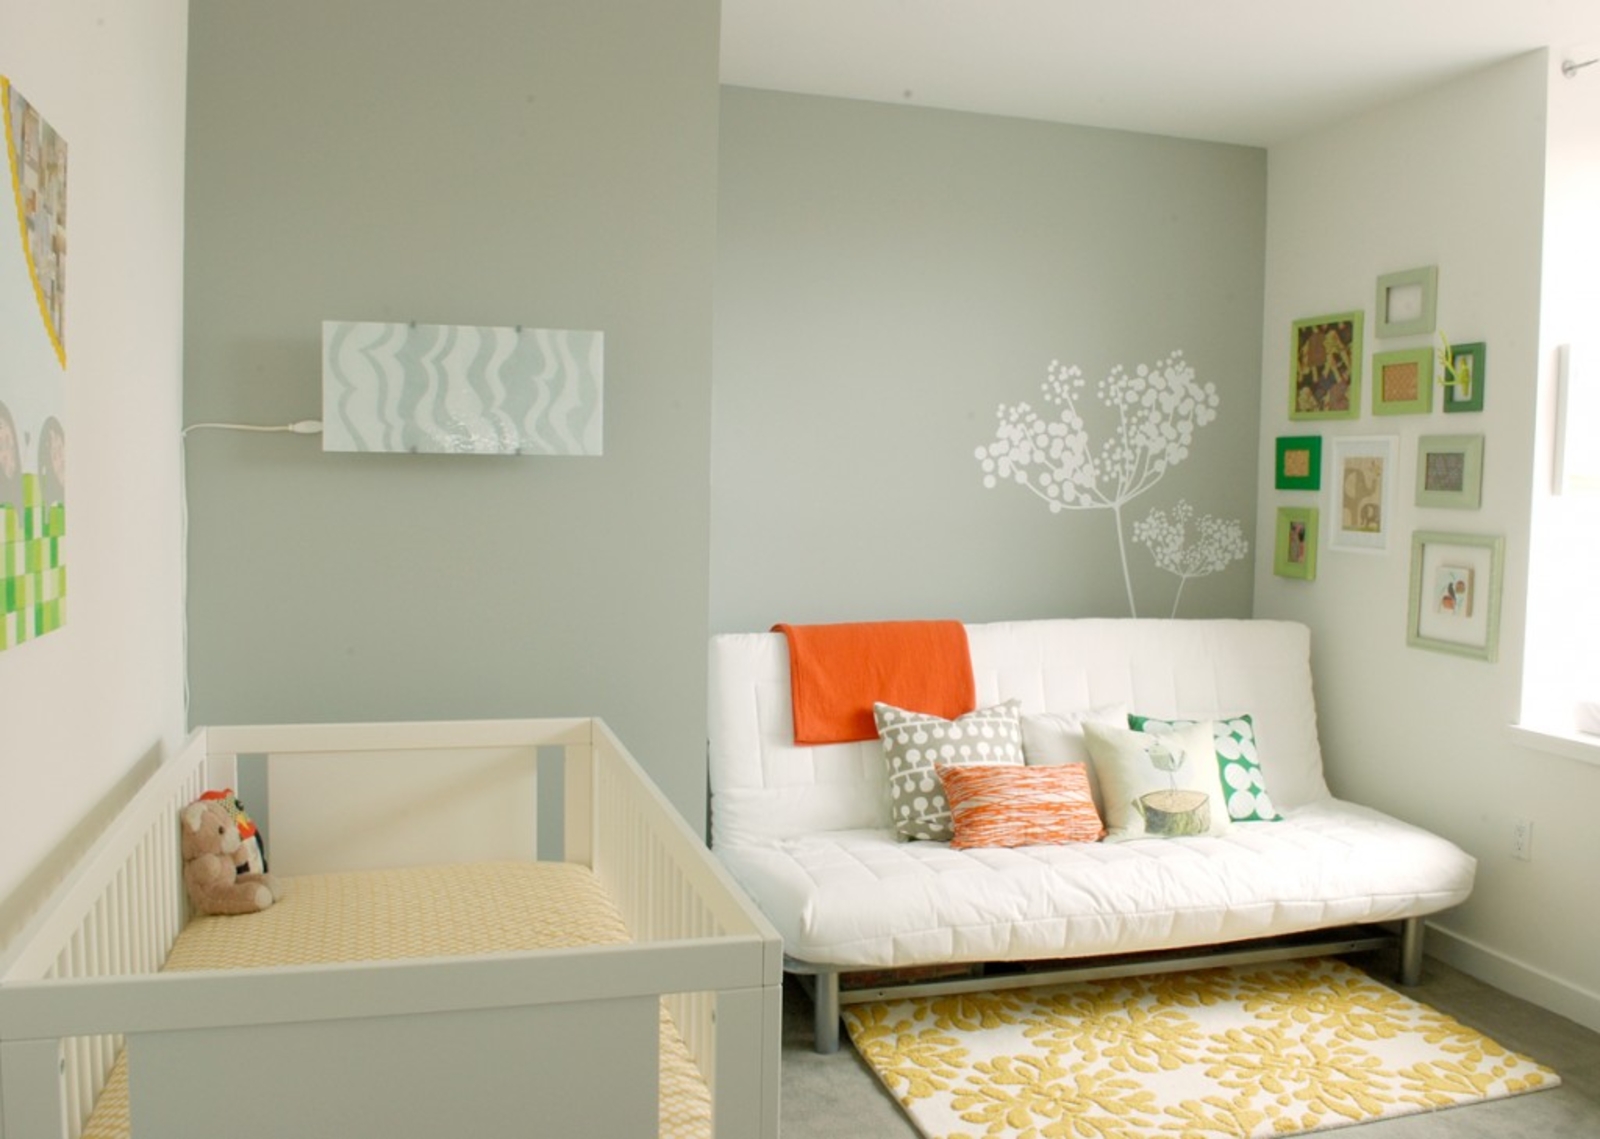 modern-baby-room-ideas-with-white-foamy-seating-plus-cushions-feat-rectangular-wooden-crib-and-yellow-rug